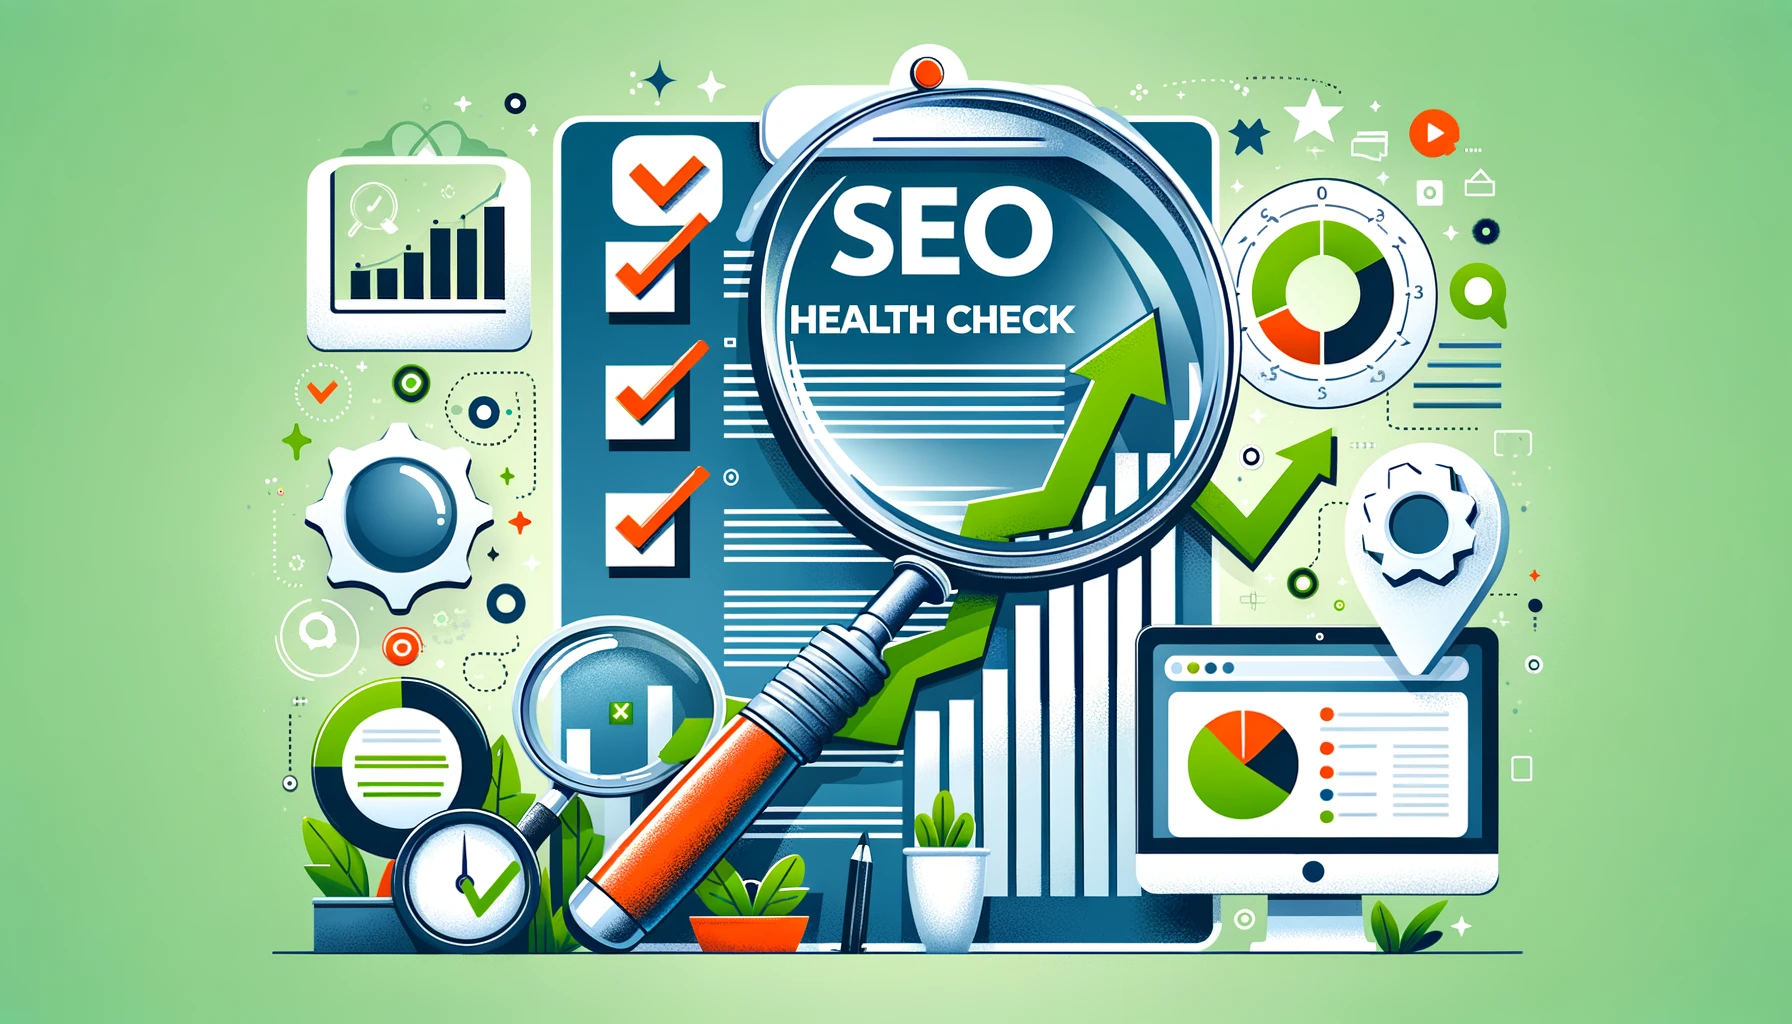 Digital illustration depicting an SEO Health Check with a checklist of SEO symbols, a magnifying glass inspecting a webpage, analytics on a computer screen, and an upward-trending green graph symbolizing SEO improvement.